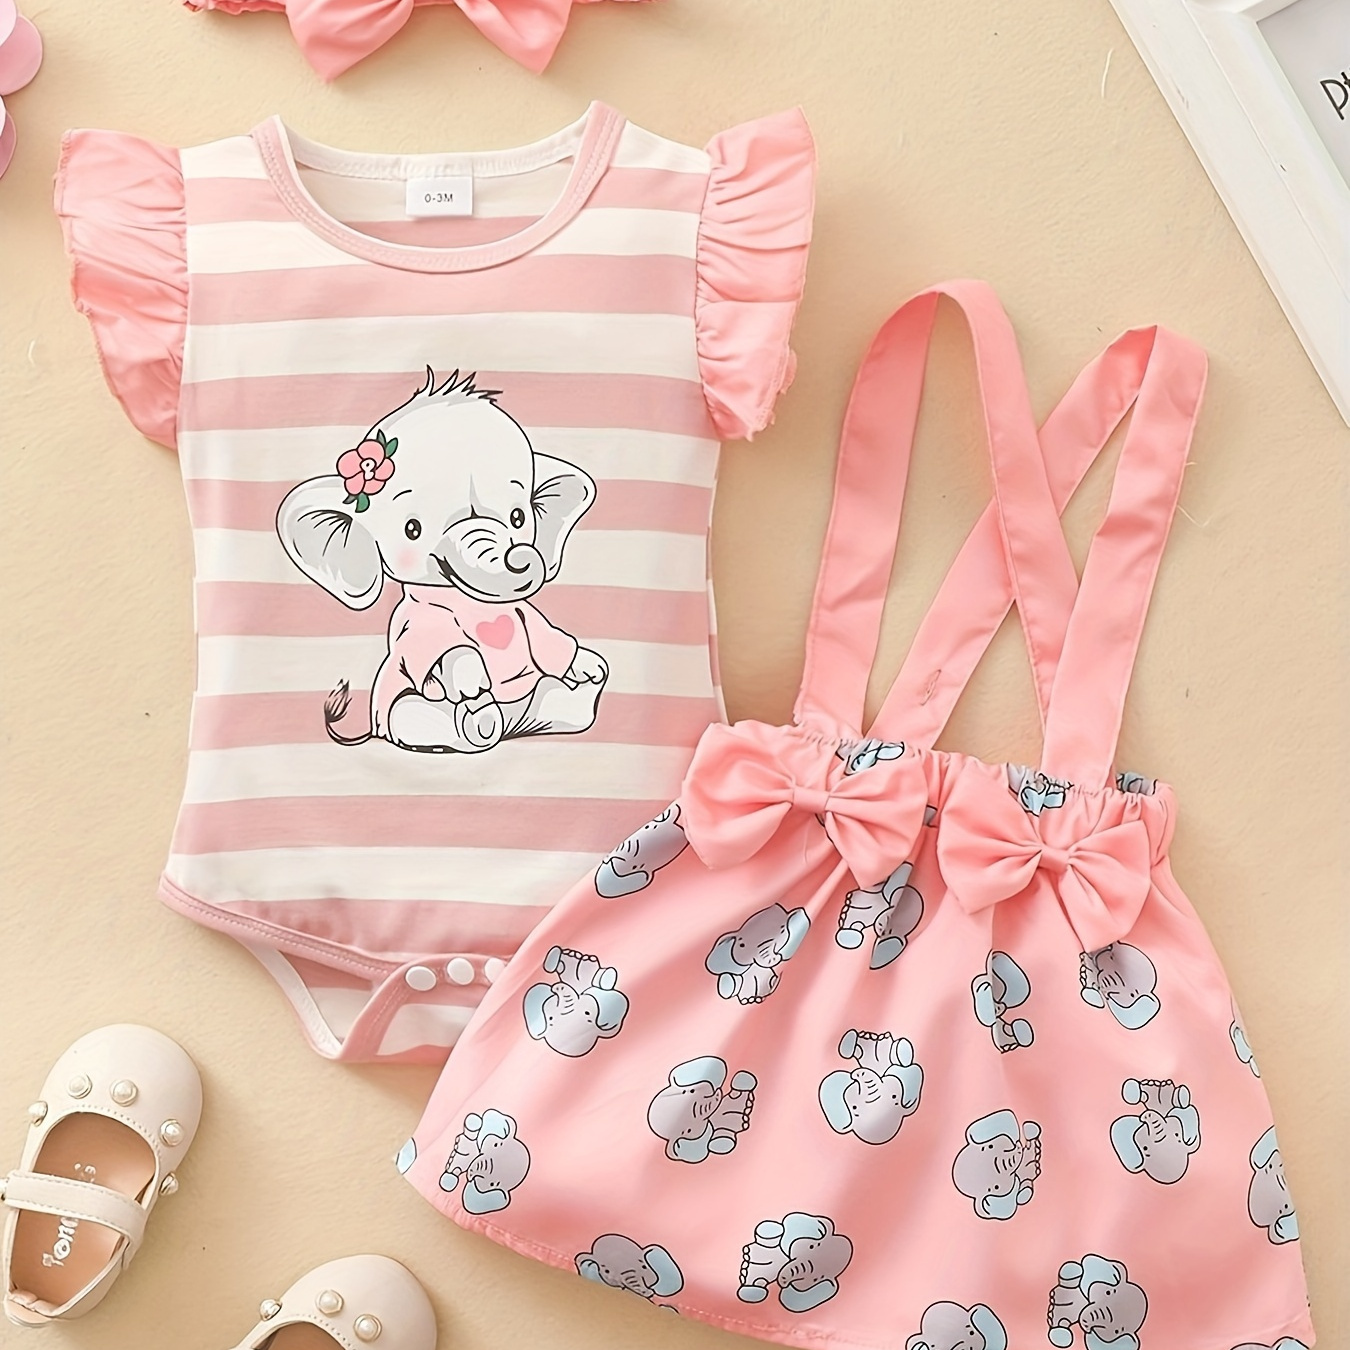 

Baby's Cute Elephant Print 2pcs Summer Outfit, Striped Cap Sleeveless Bodysuit & Hairband & Bowknot Suspender Overall Skirt Set, Toddler & Infant Girl's Clothes For Daily/holiday/party